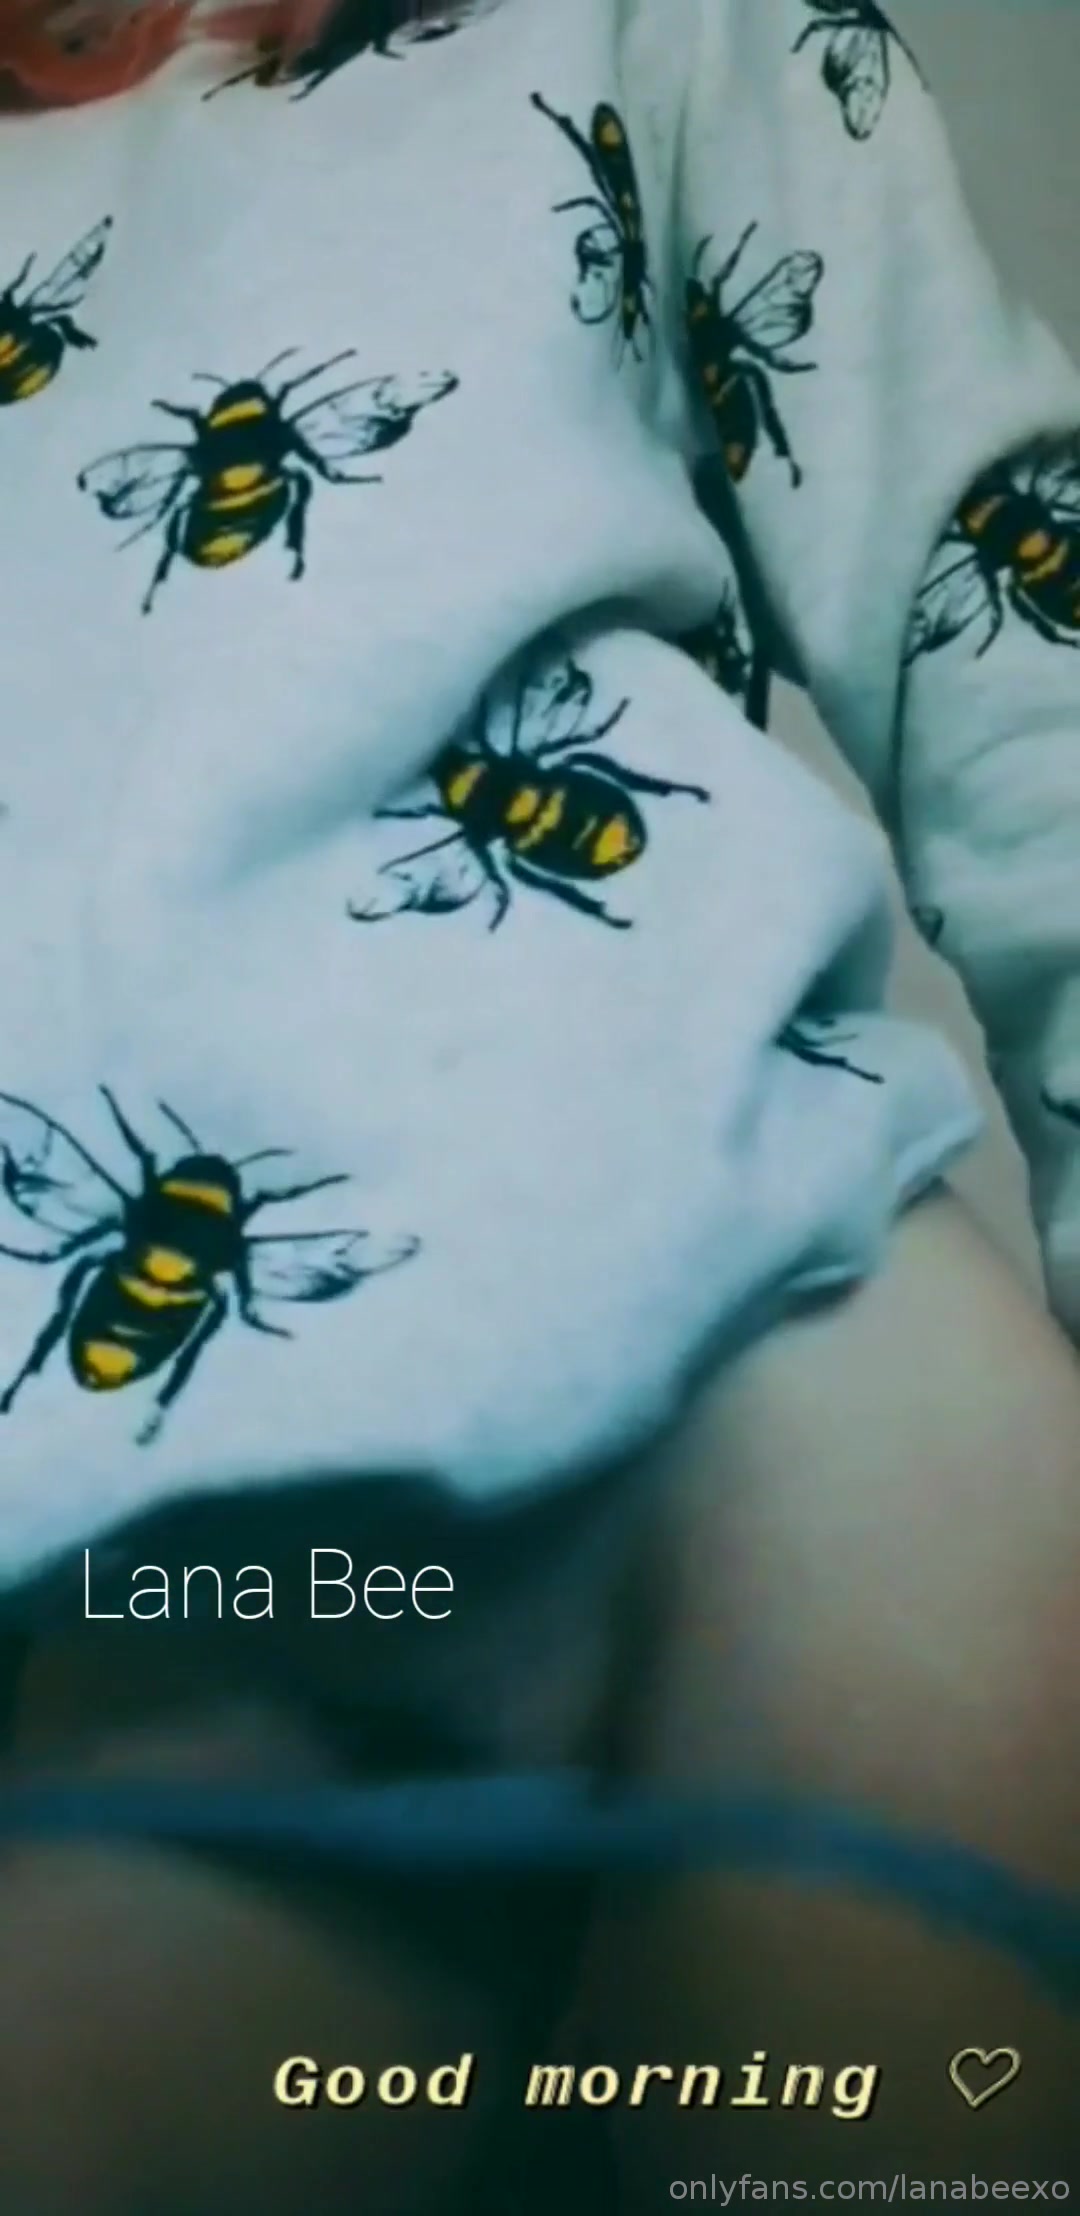 Lana bee onlyfans